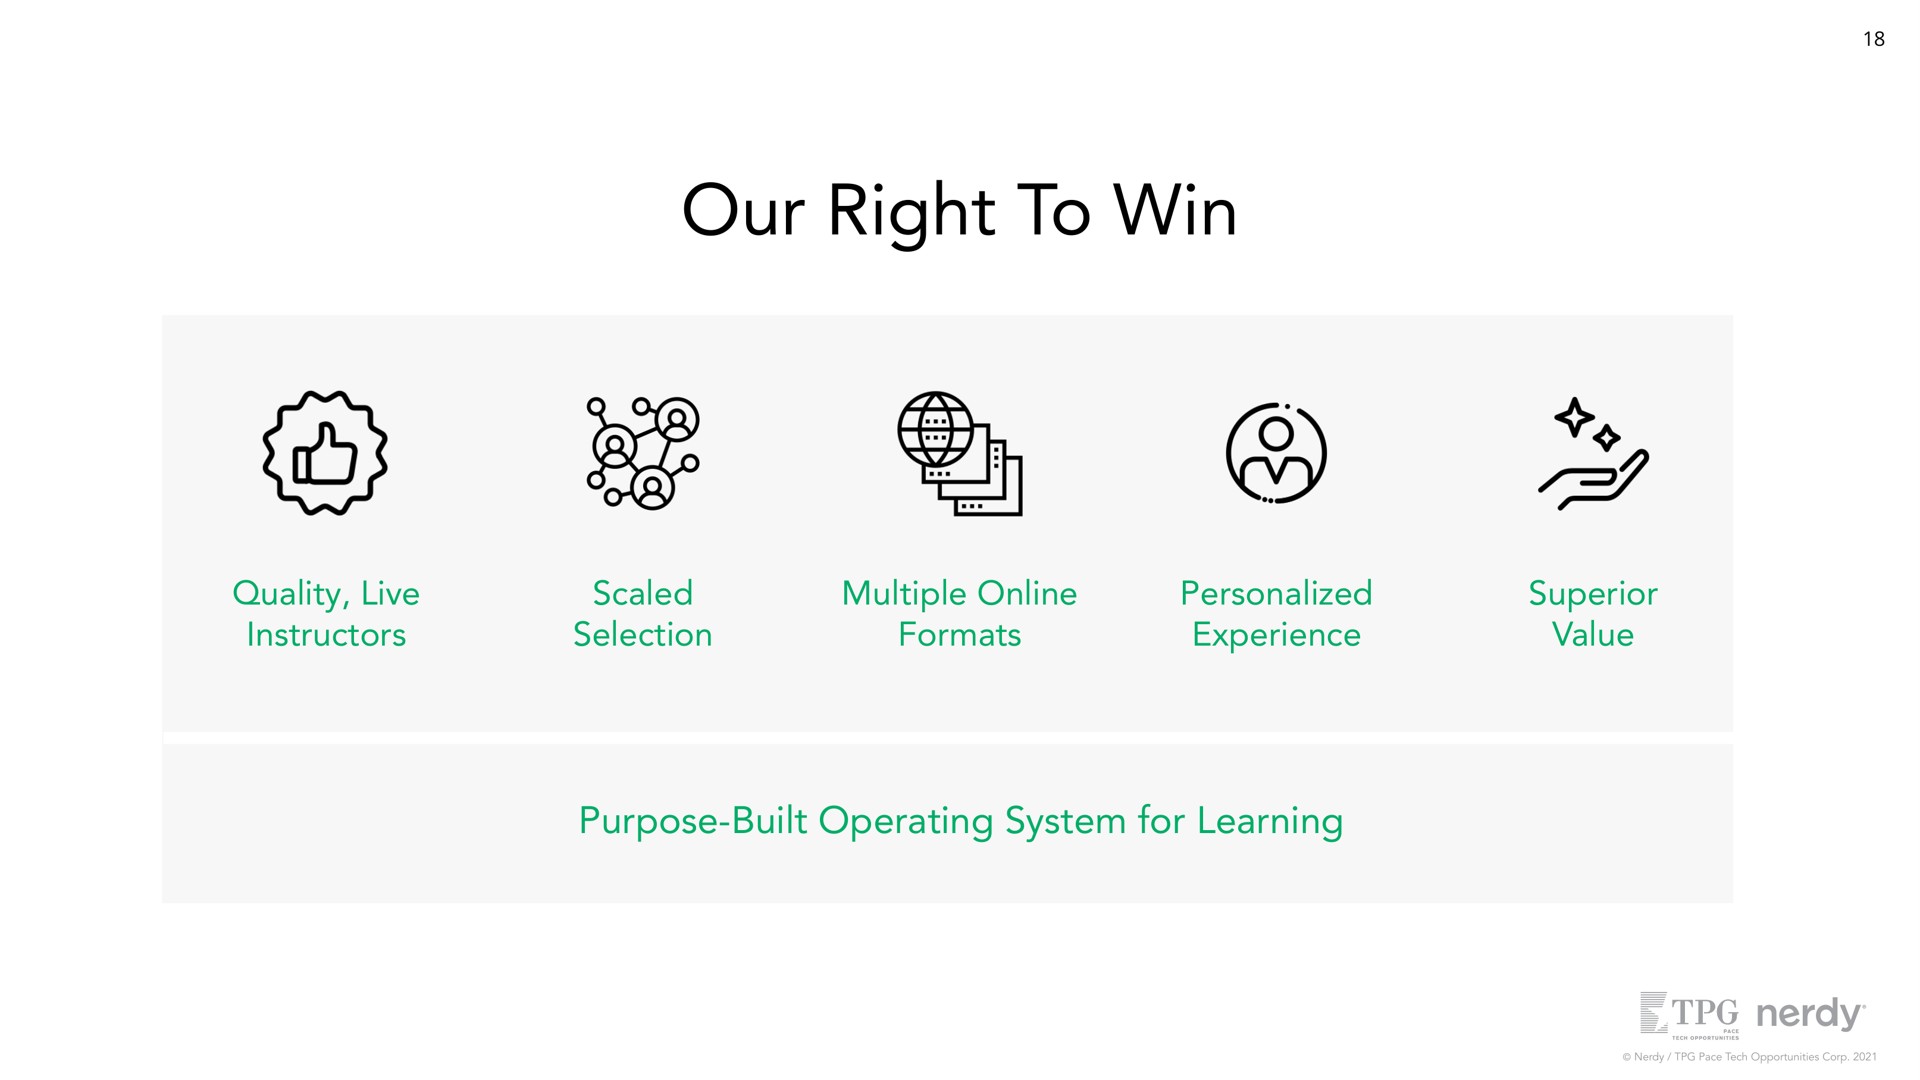 our right to win quality live instructors scaled selection multiple formats personalized experience superior value purpose built operating system for learning a no | Nerdy